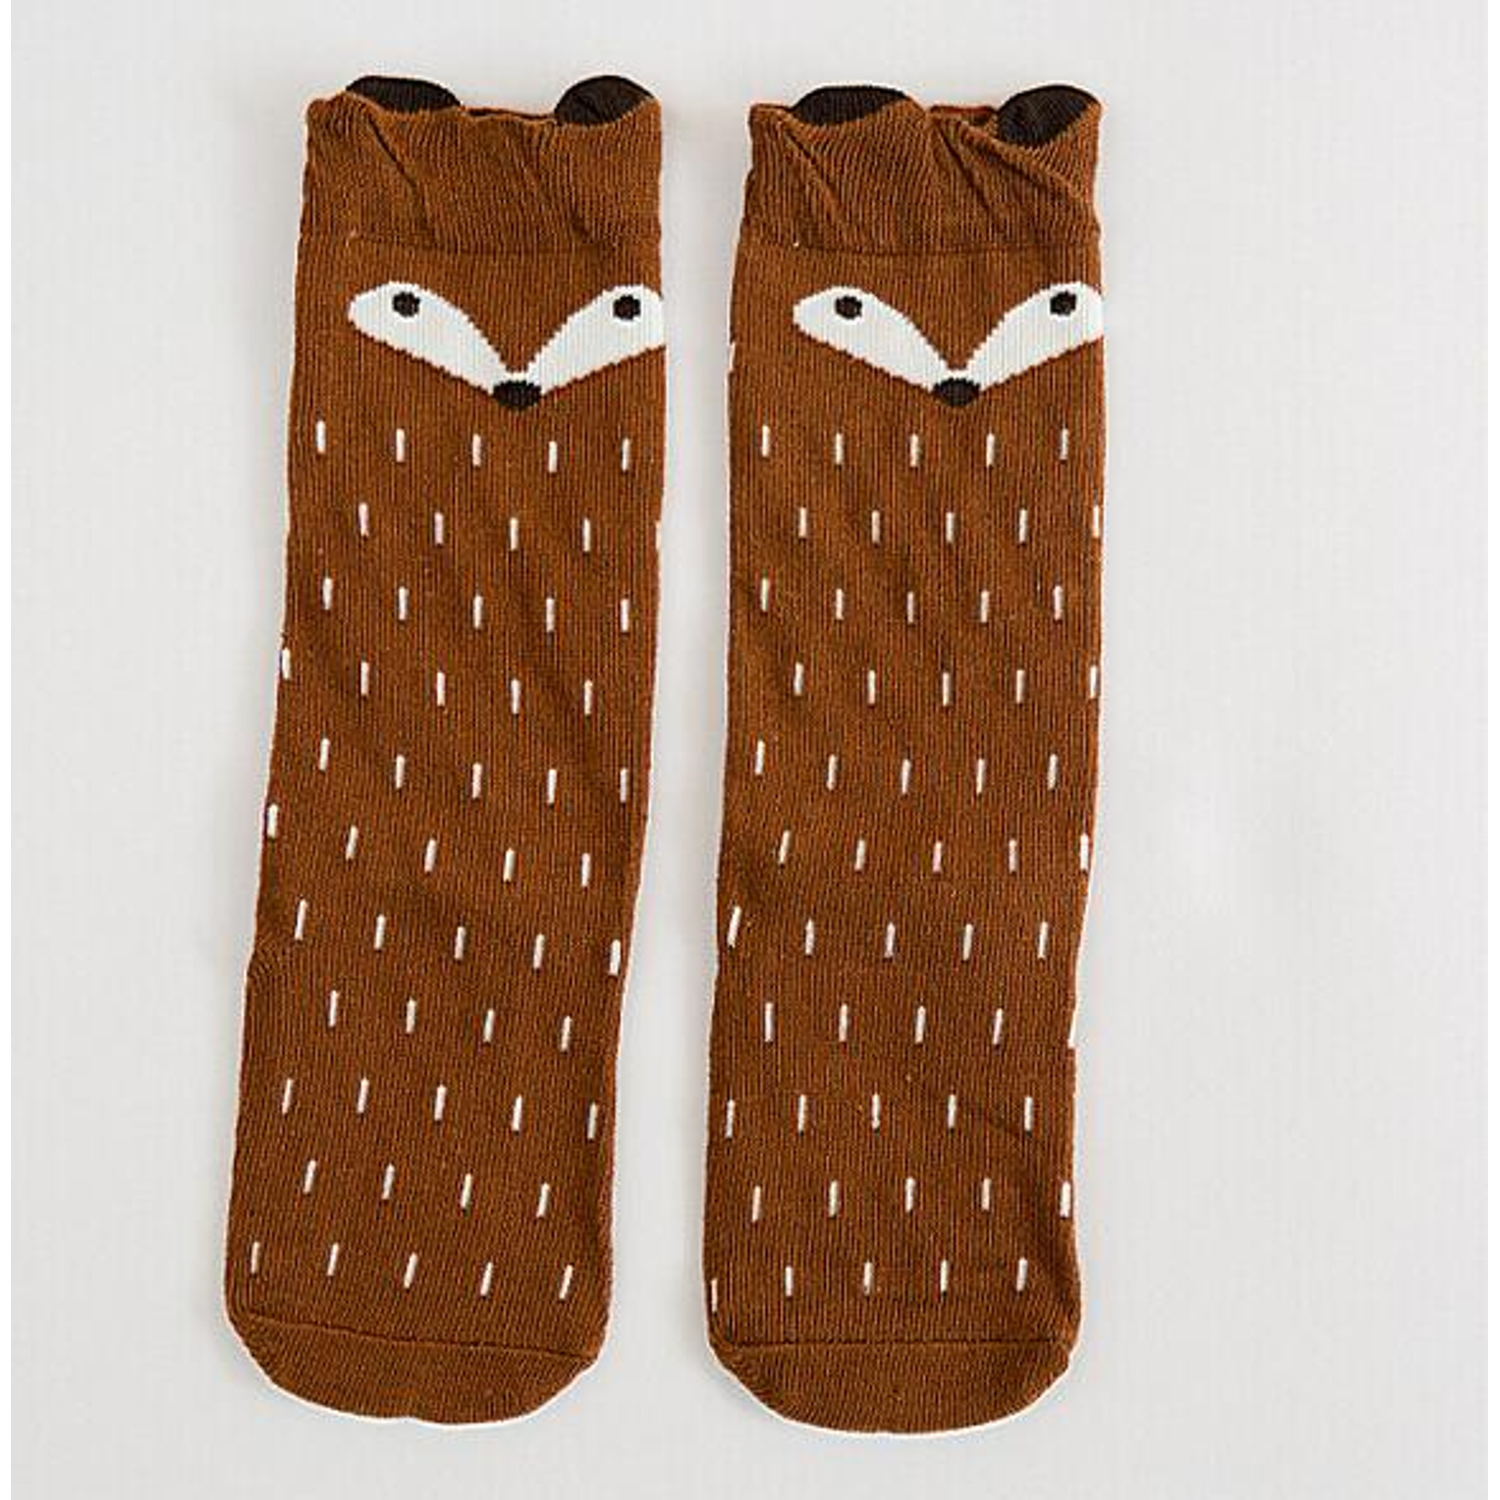 THE RED FOX - Chaussettes motif renards - ManyMornings.fr